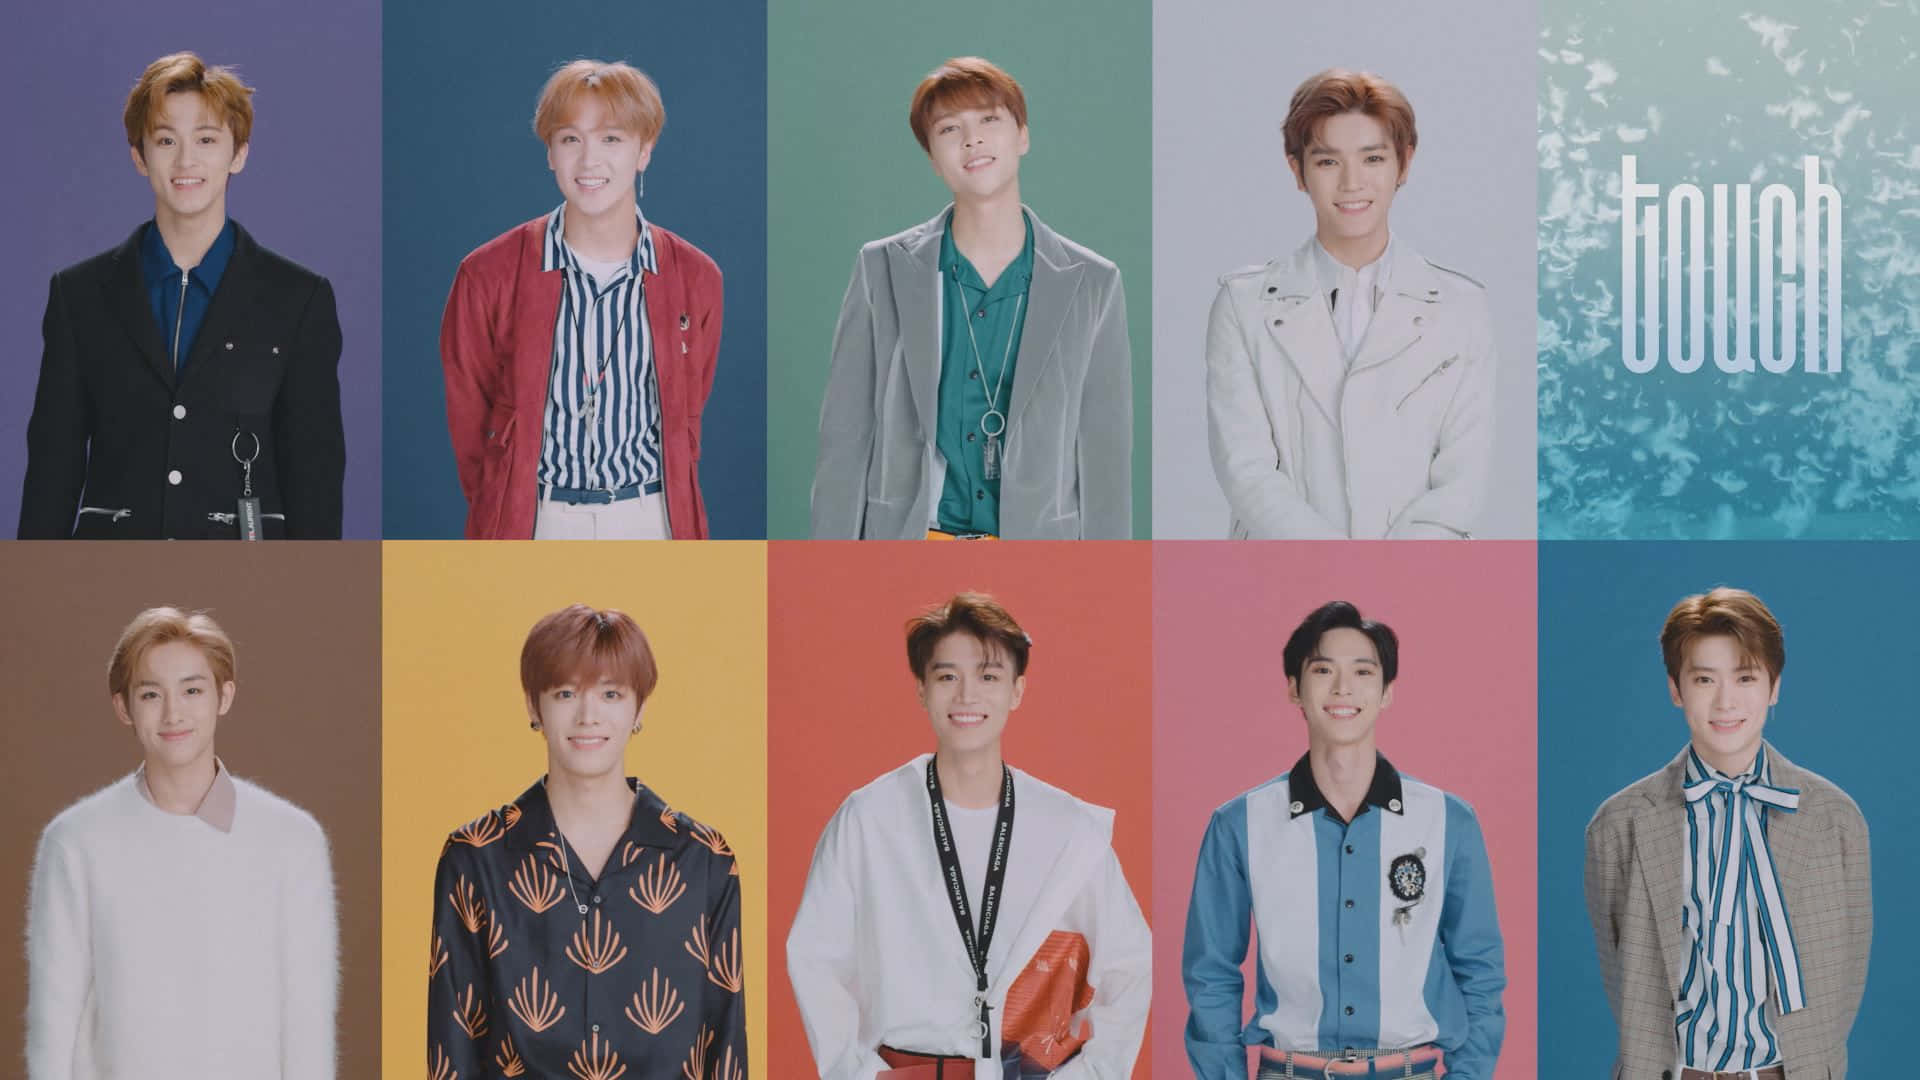 NCT group posing together in vibrant urban setting